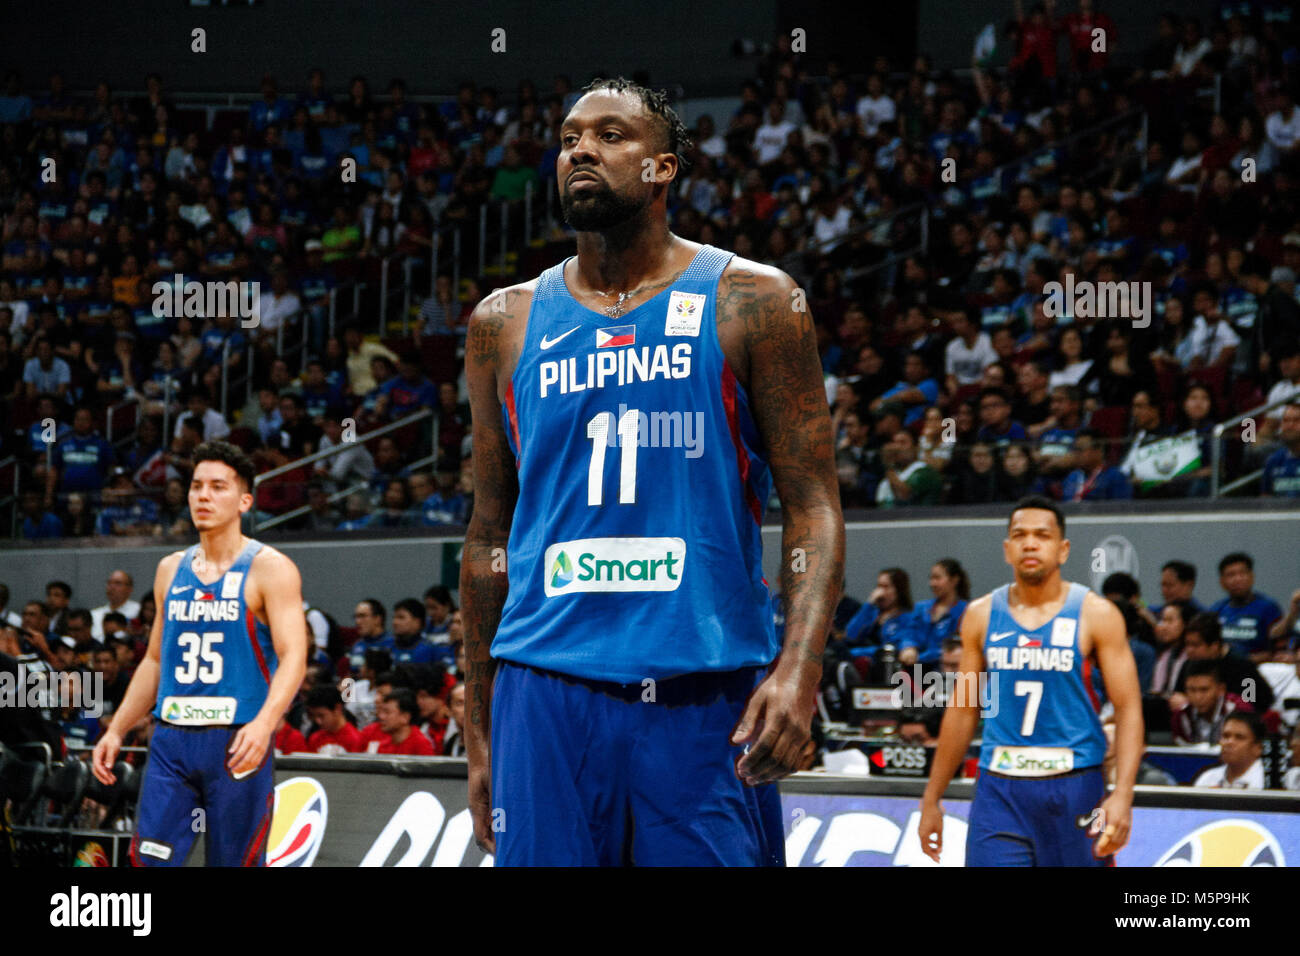 Philippines. 25th Feb, 2018. Andray Blatche (11) looks on during the qualifying game at the MOA Arena. The Philippine and Japanese basketball team met at the hardcourt of the Mall of Asia Arena in Pasay City, for the FIBA World Cup 2019 Asian Qualifiers. The Philippines won over Japan, 89-84. Credit: J Gerard Seguia/ZUMA Wire/Alamy Live News Stock Photo